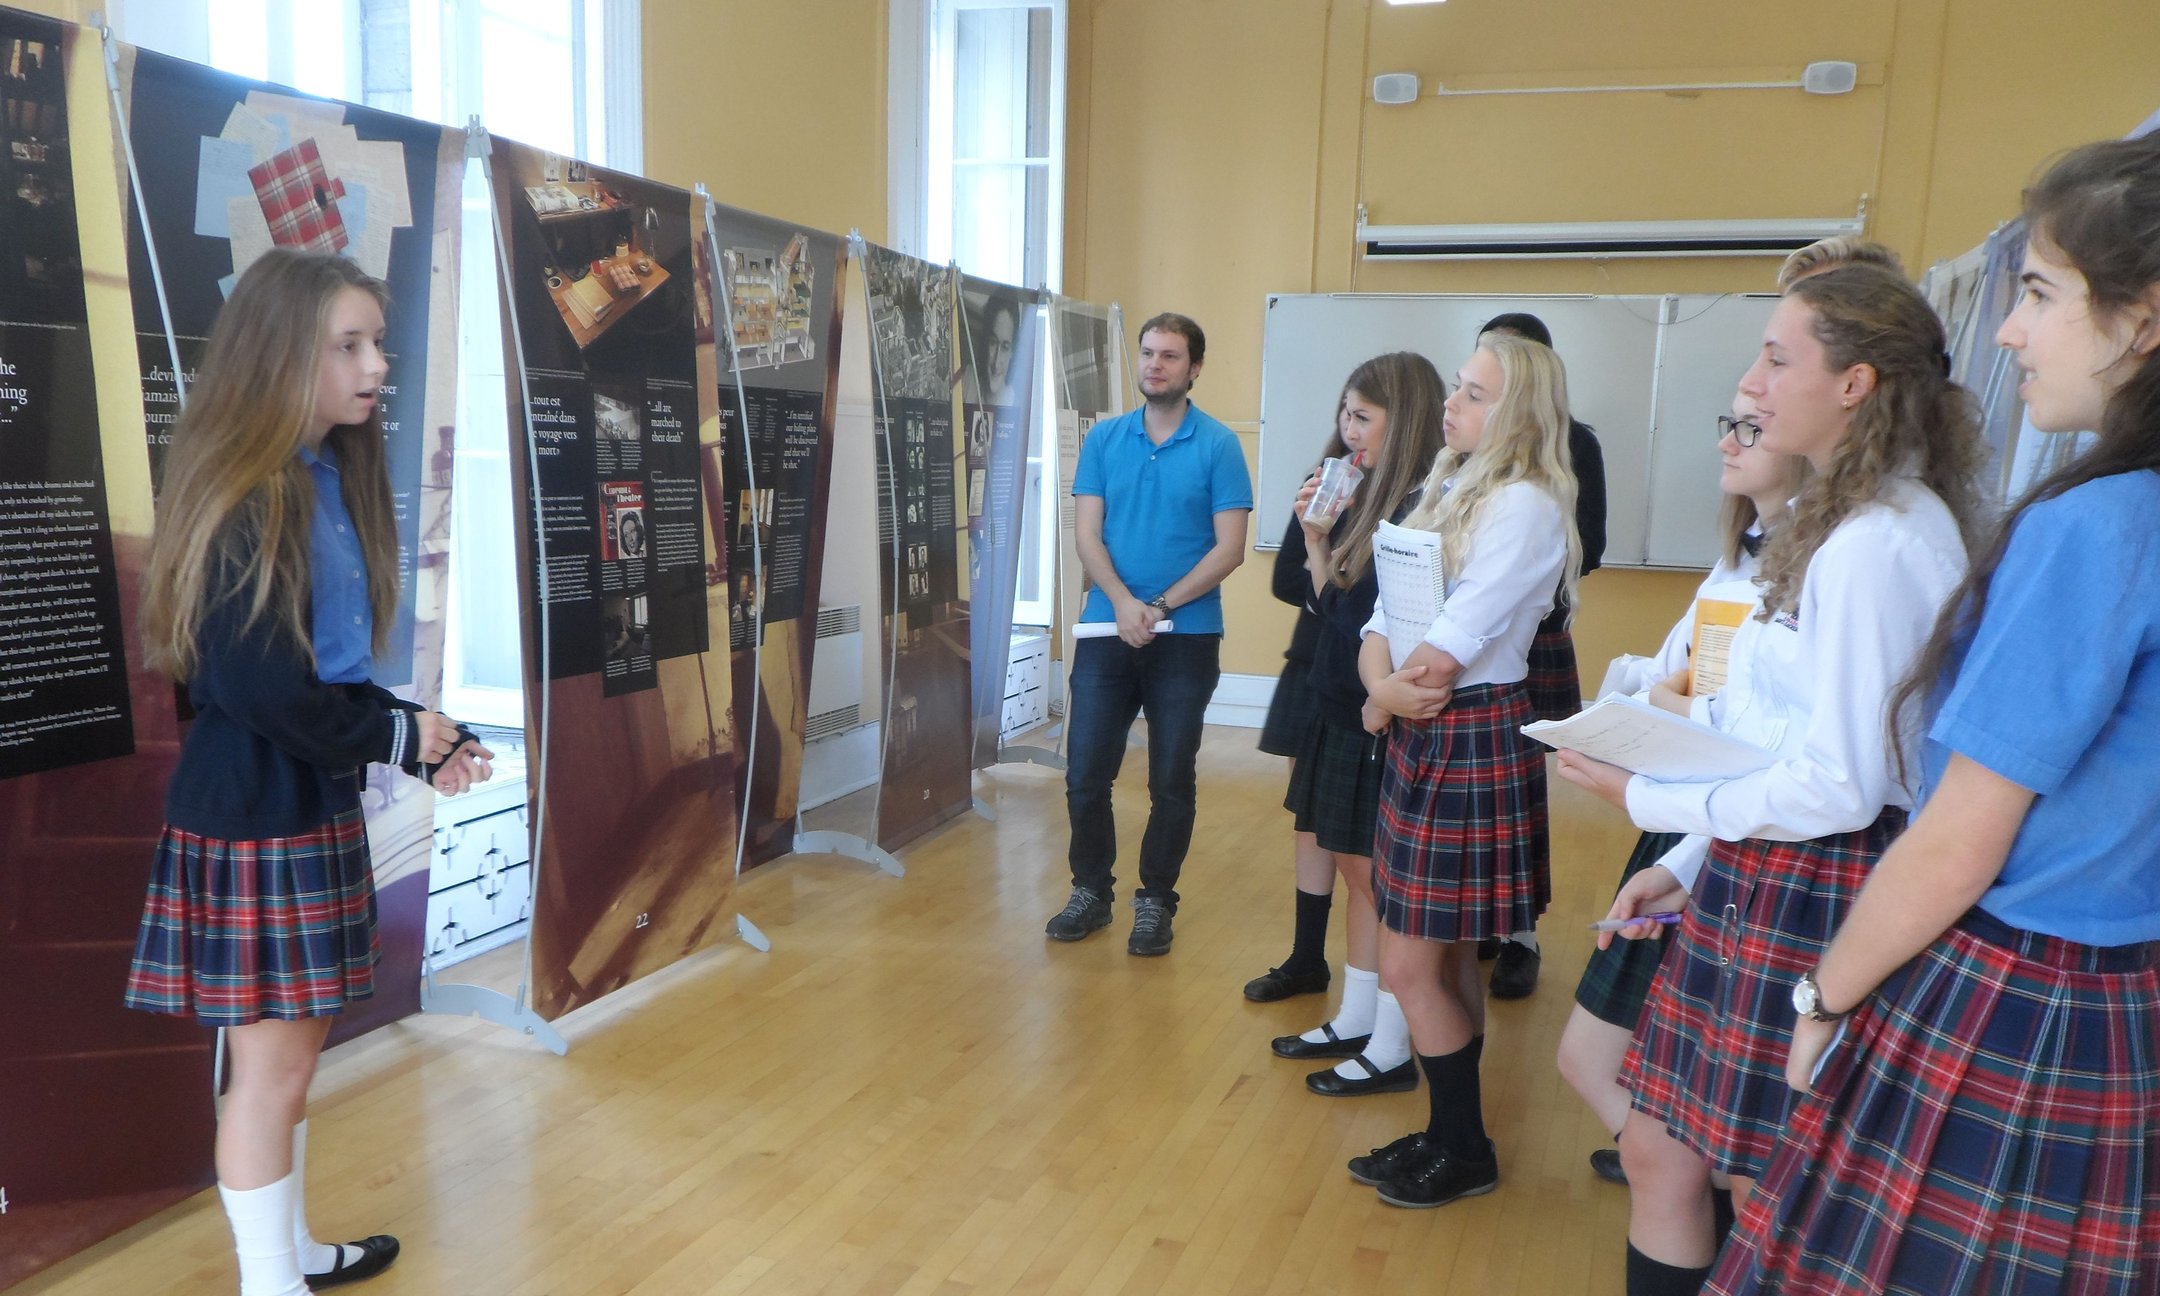 Students discussing the exhibition’s themes with their peers in Terrebonne (October 2016)